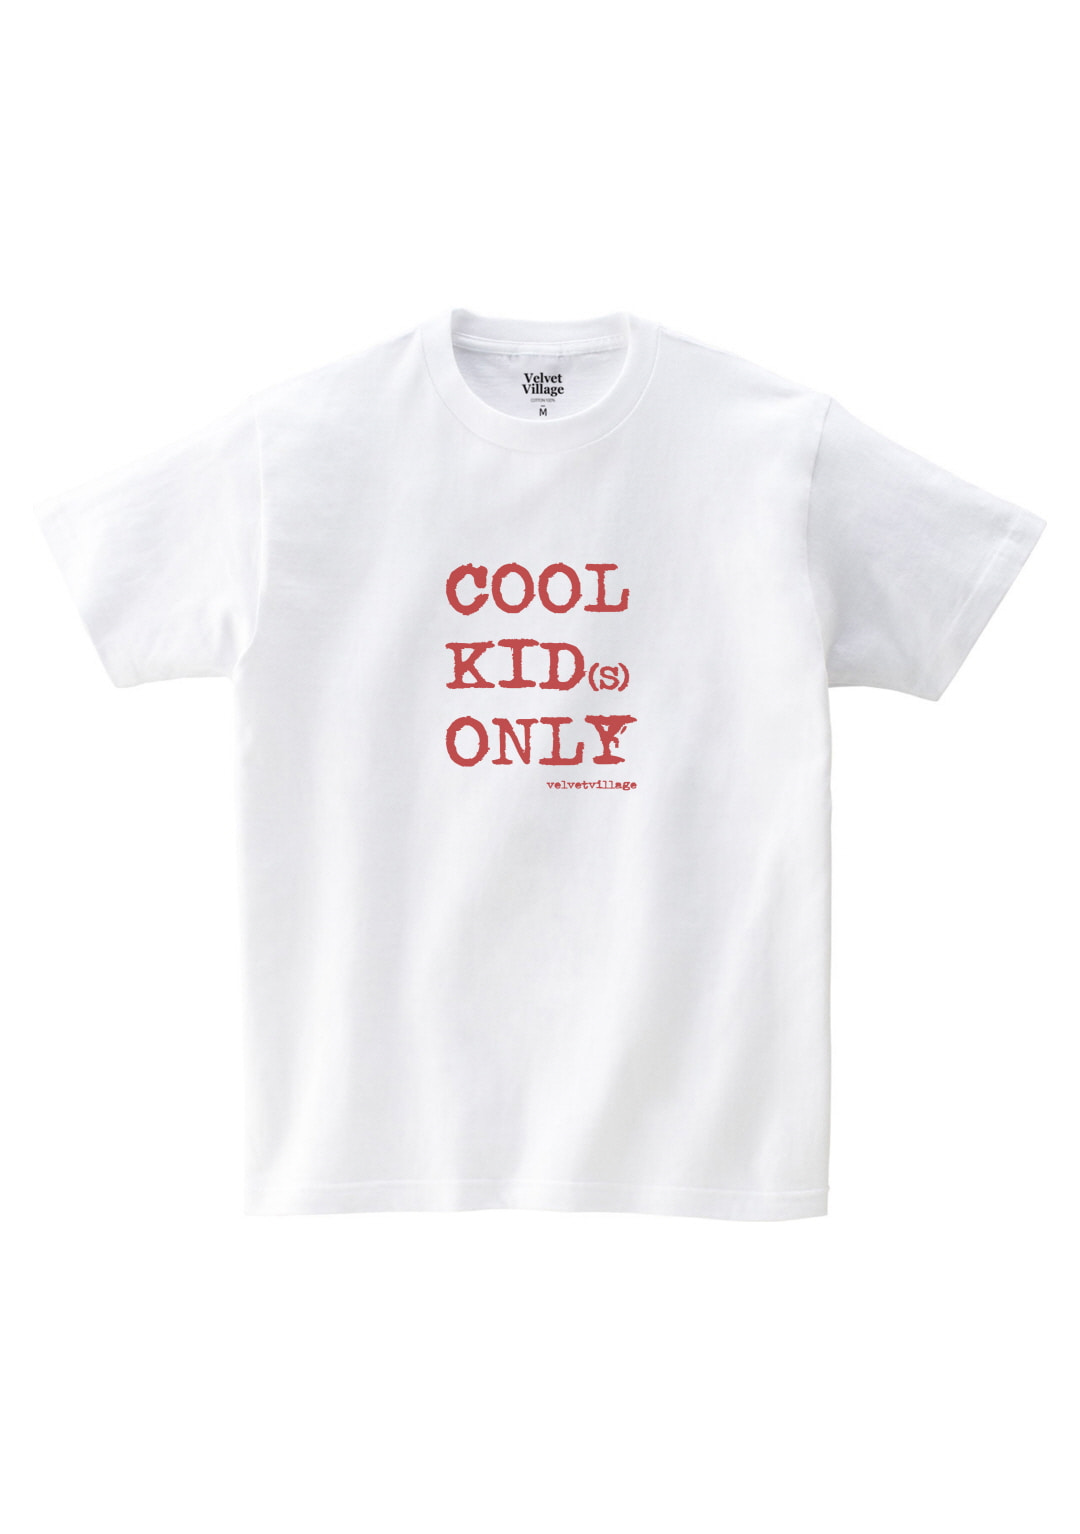 Cool kids only T-shirt (White)